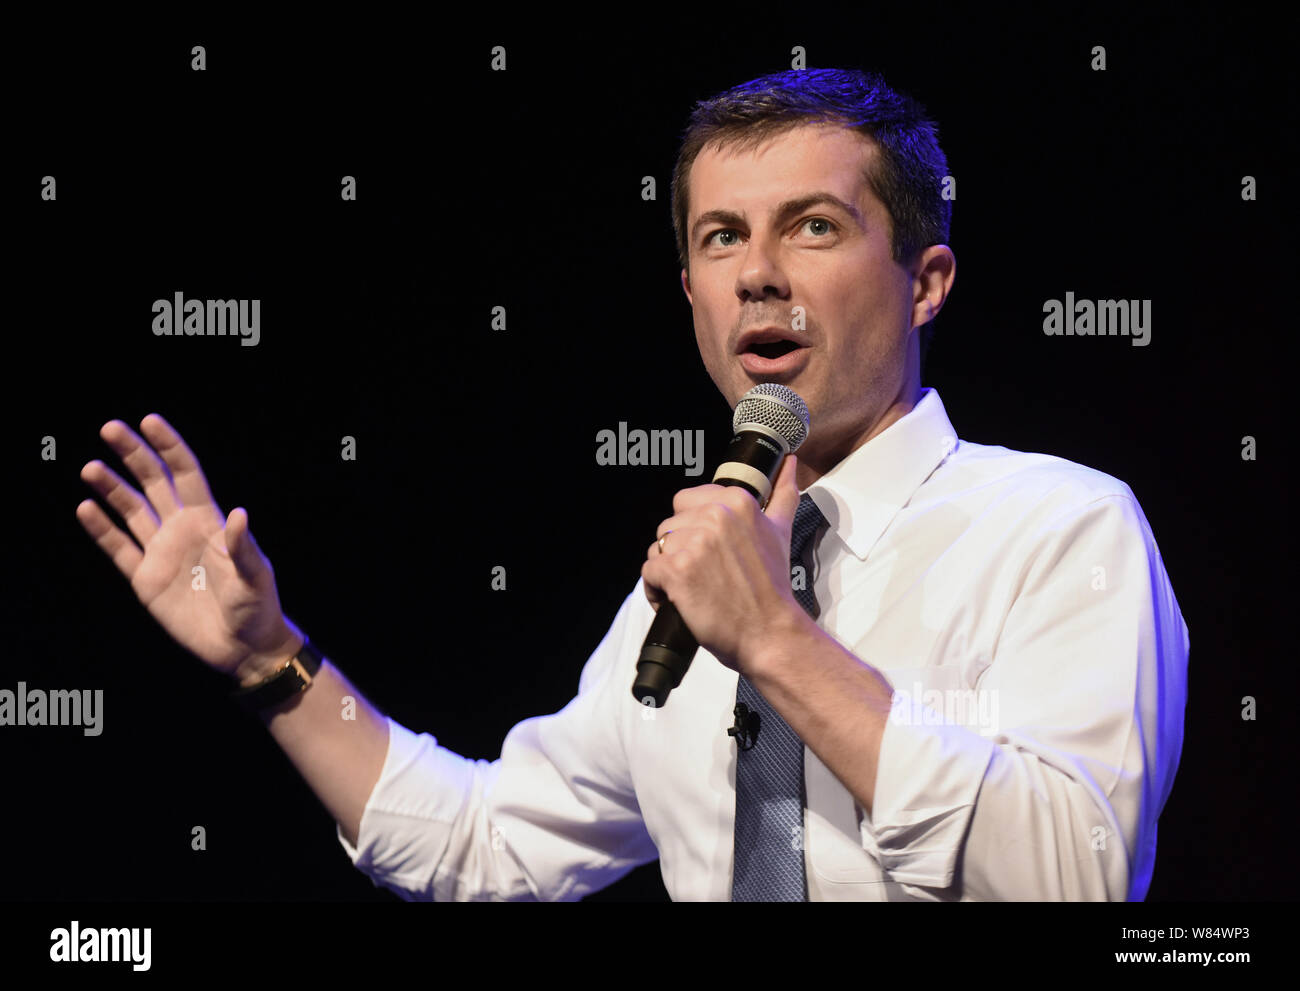 Orlando, United States. 07th Aug, 2019. August 7, 2019 - Orlando, Florida, United States - South Bend, Indiana Mayor and Democratic presidential candidate Pete Buttigieg speaks at a grassroots event at the Plaza Live on August 7, 2019 in Orlando, Florida. Credit: Paul Hennessy/Alamy Live News Stock Photo